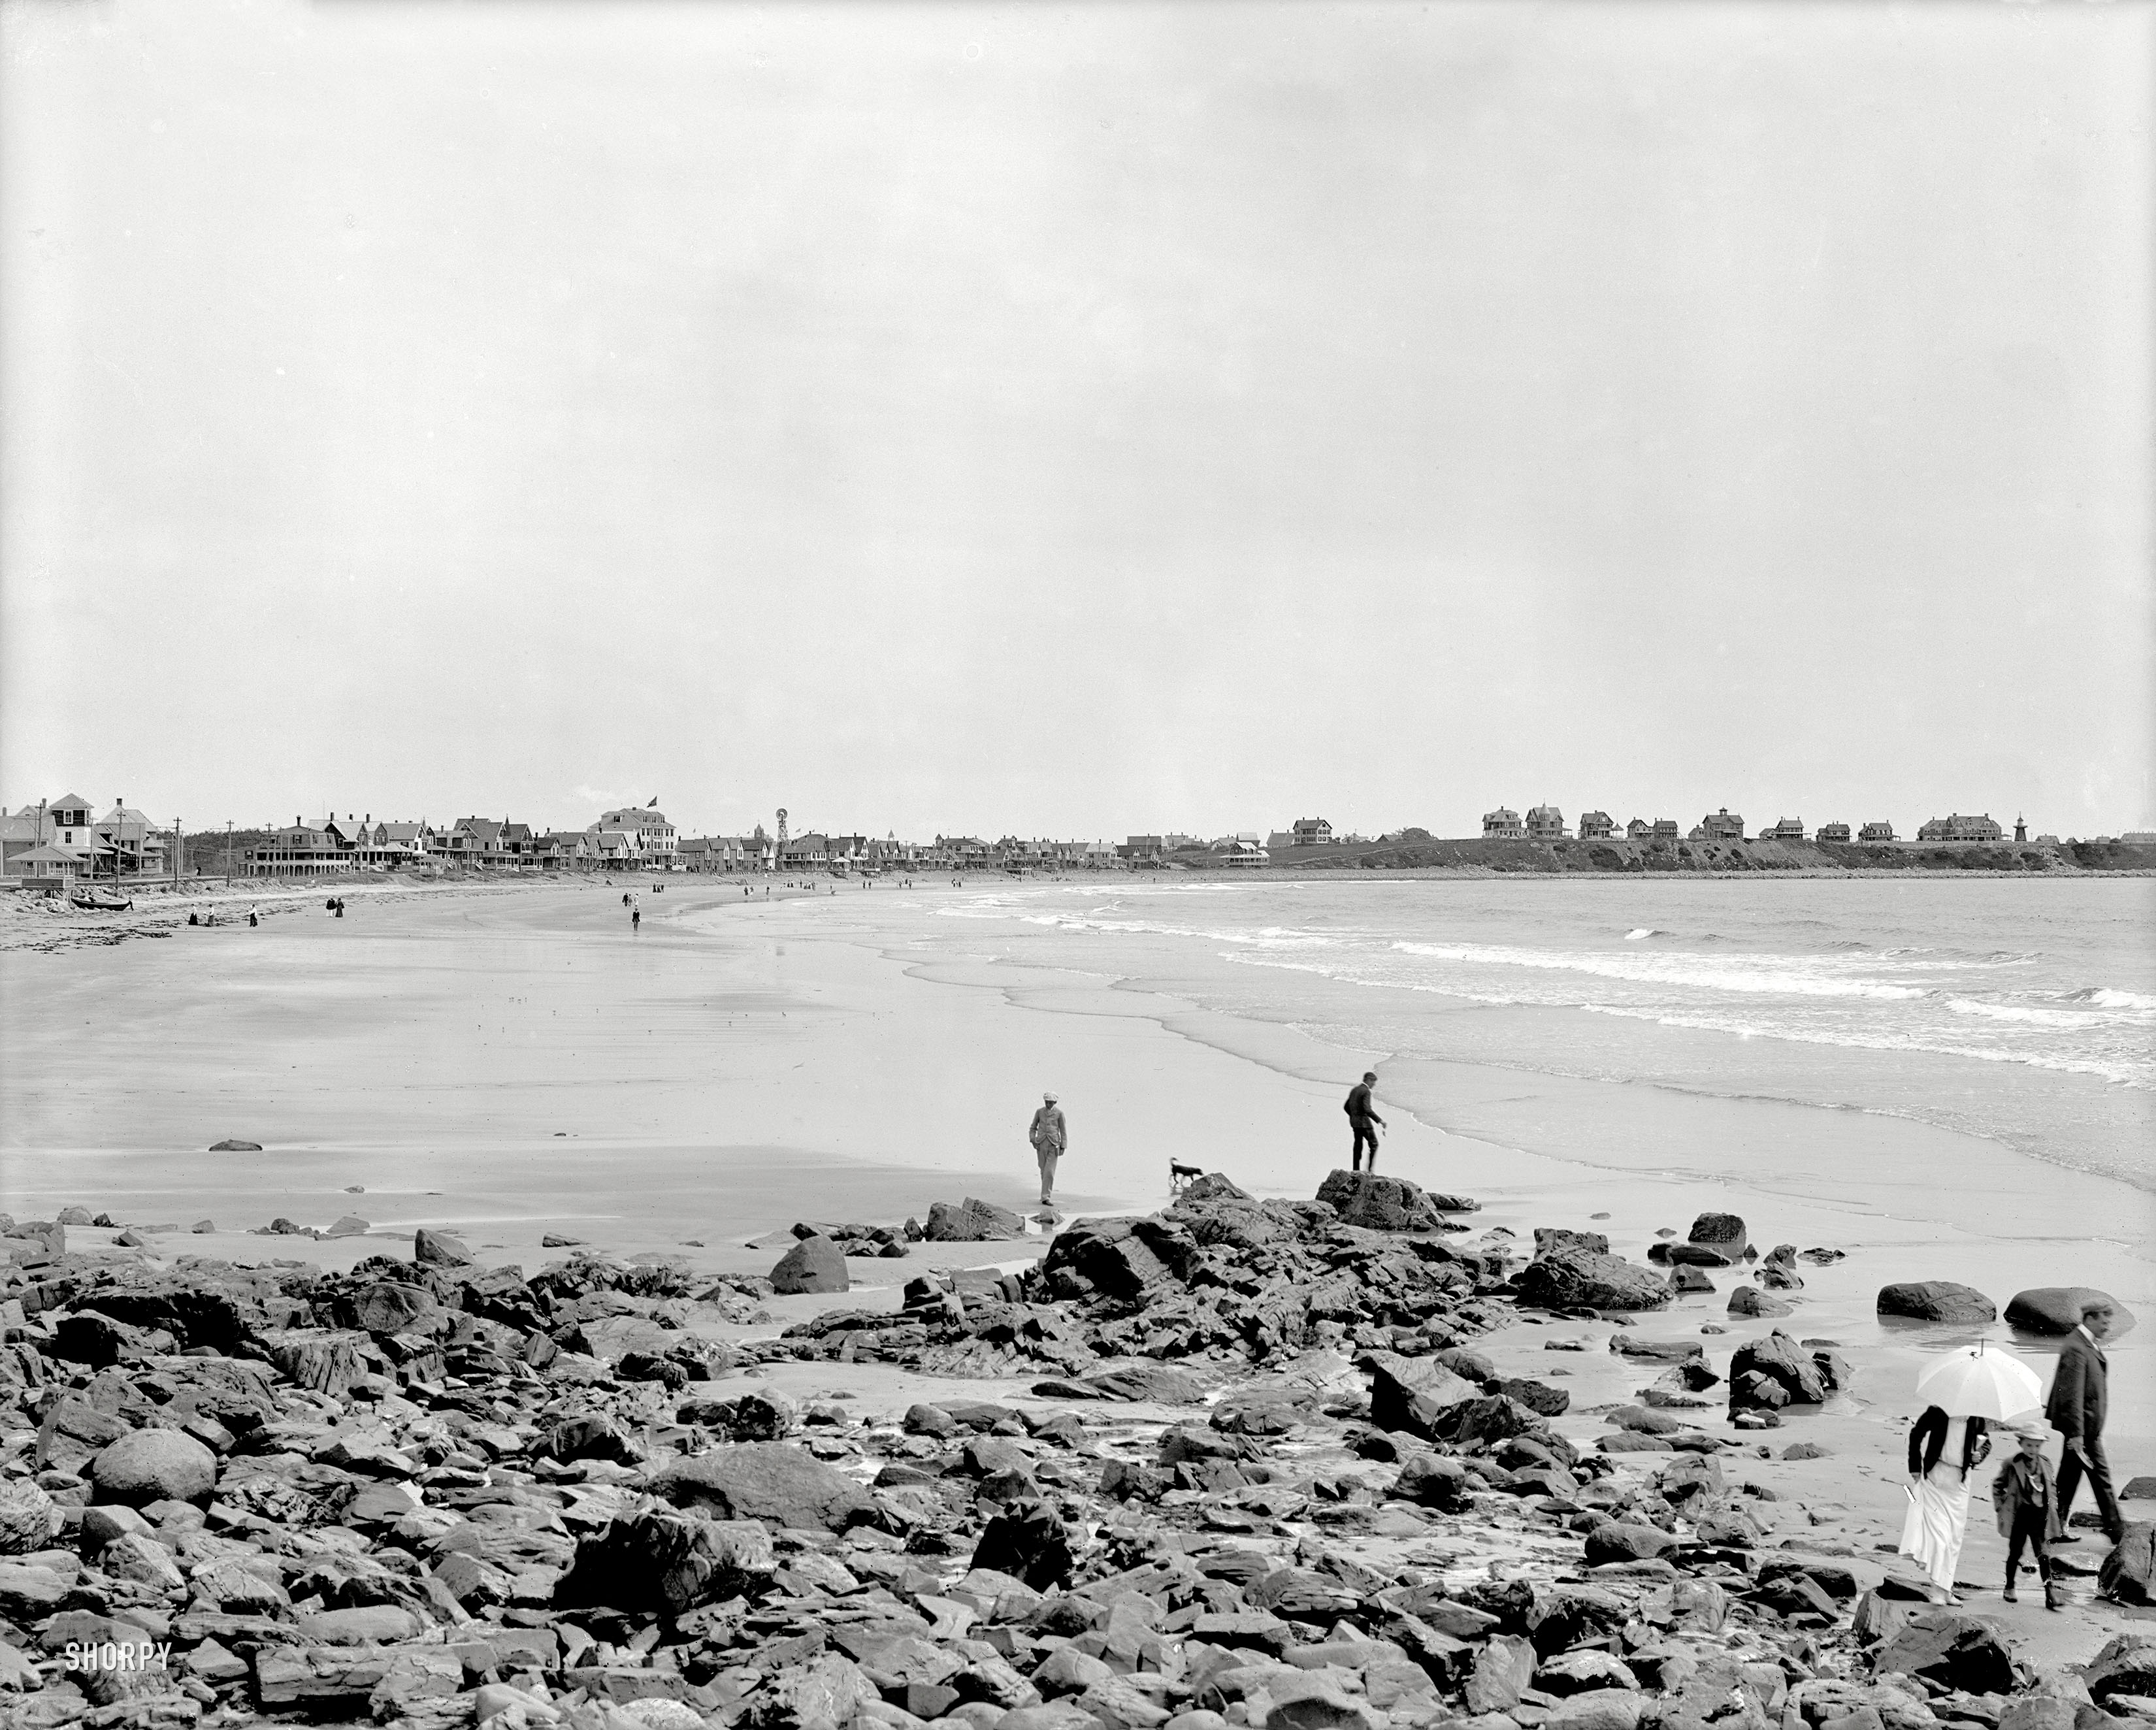 York, Maine, circa 1908. "Long Beach and resorts." 8x10 inch dry plate glass negative, Detroit Publishing Company. View full size.